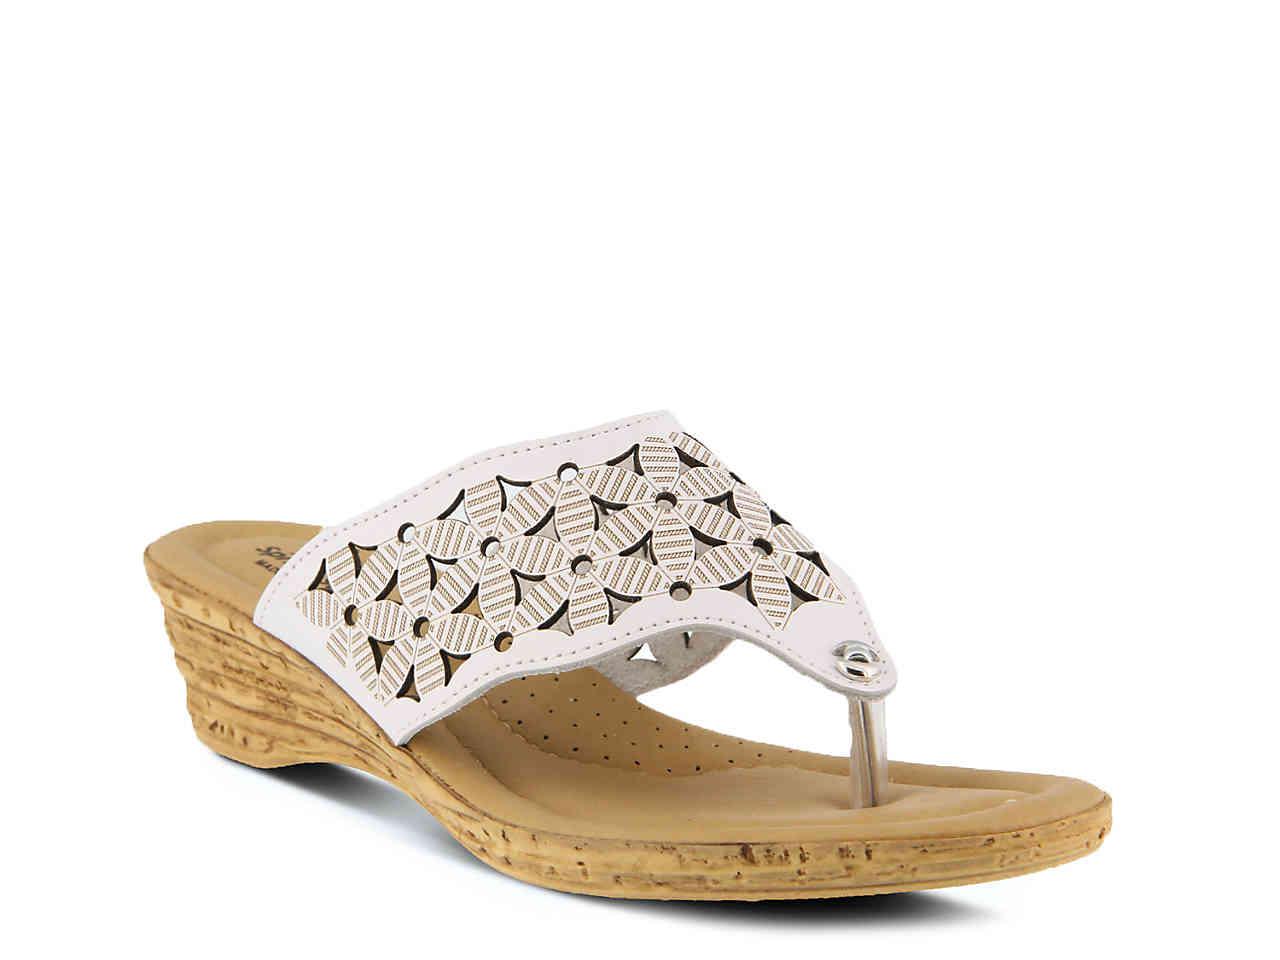 Spring Step Tiffany Wedge Sandal in White - Lyst